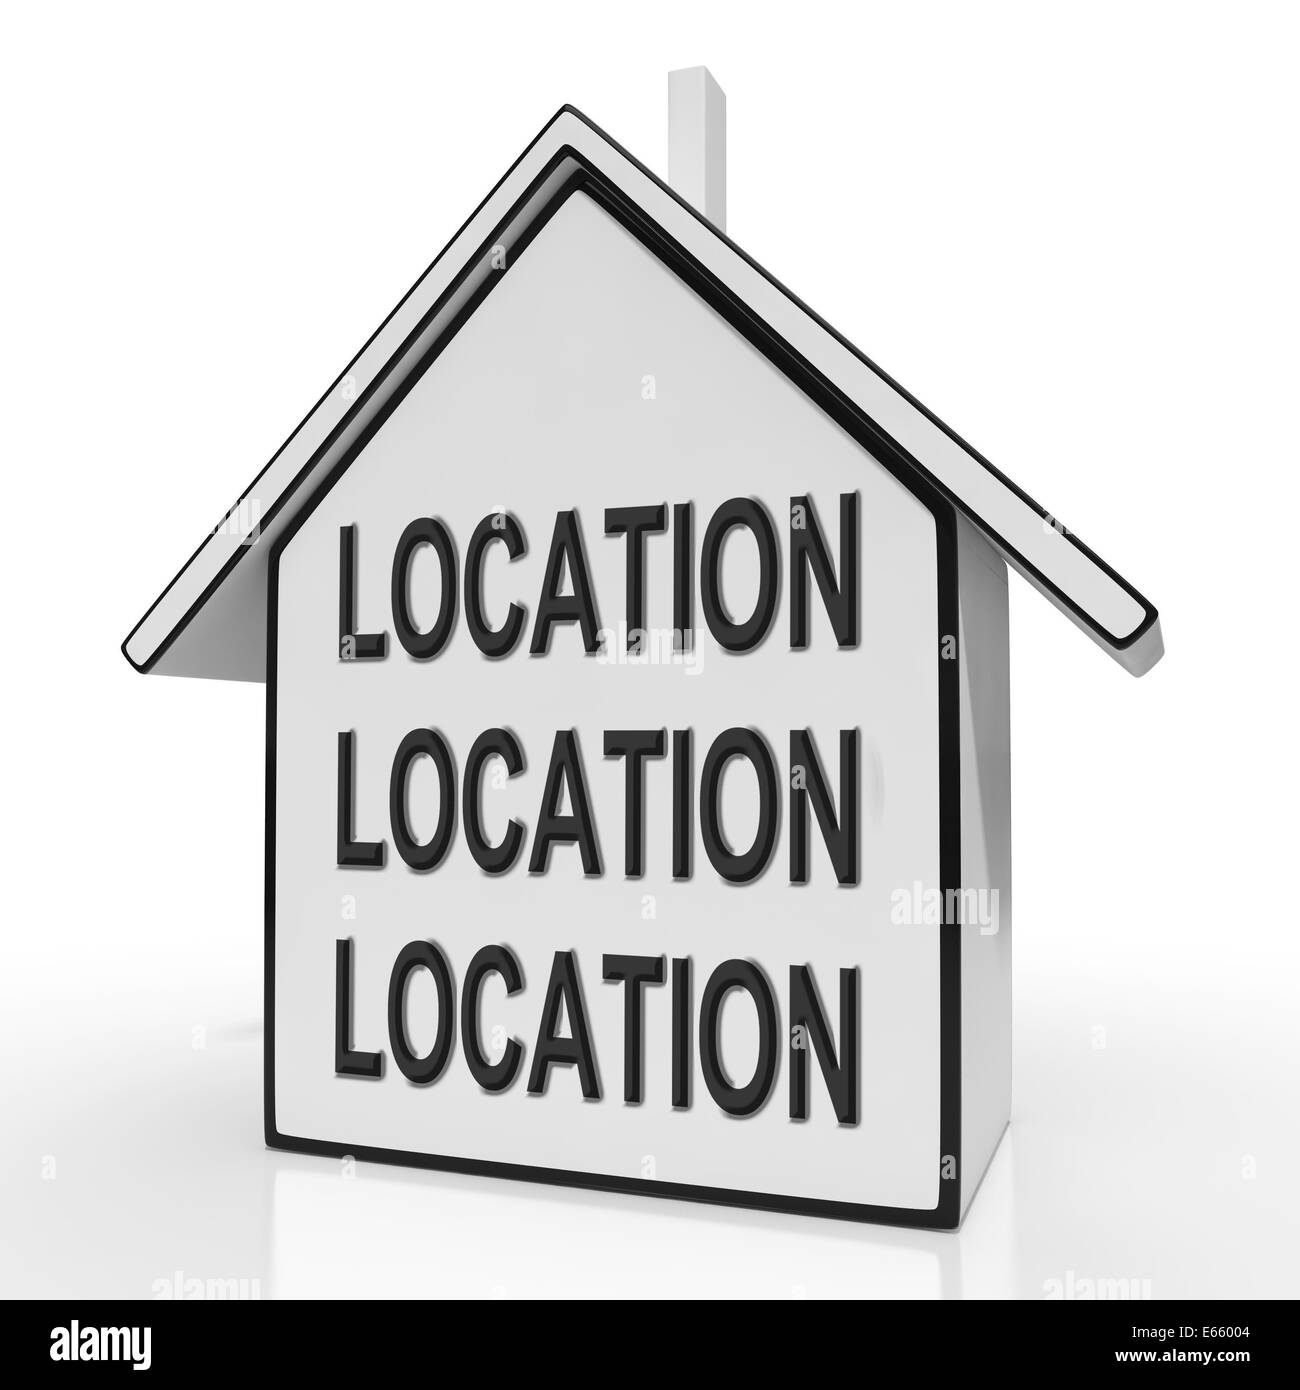 Location Location Location House Showing Prime Real Estate Stock Photo